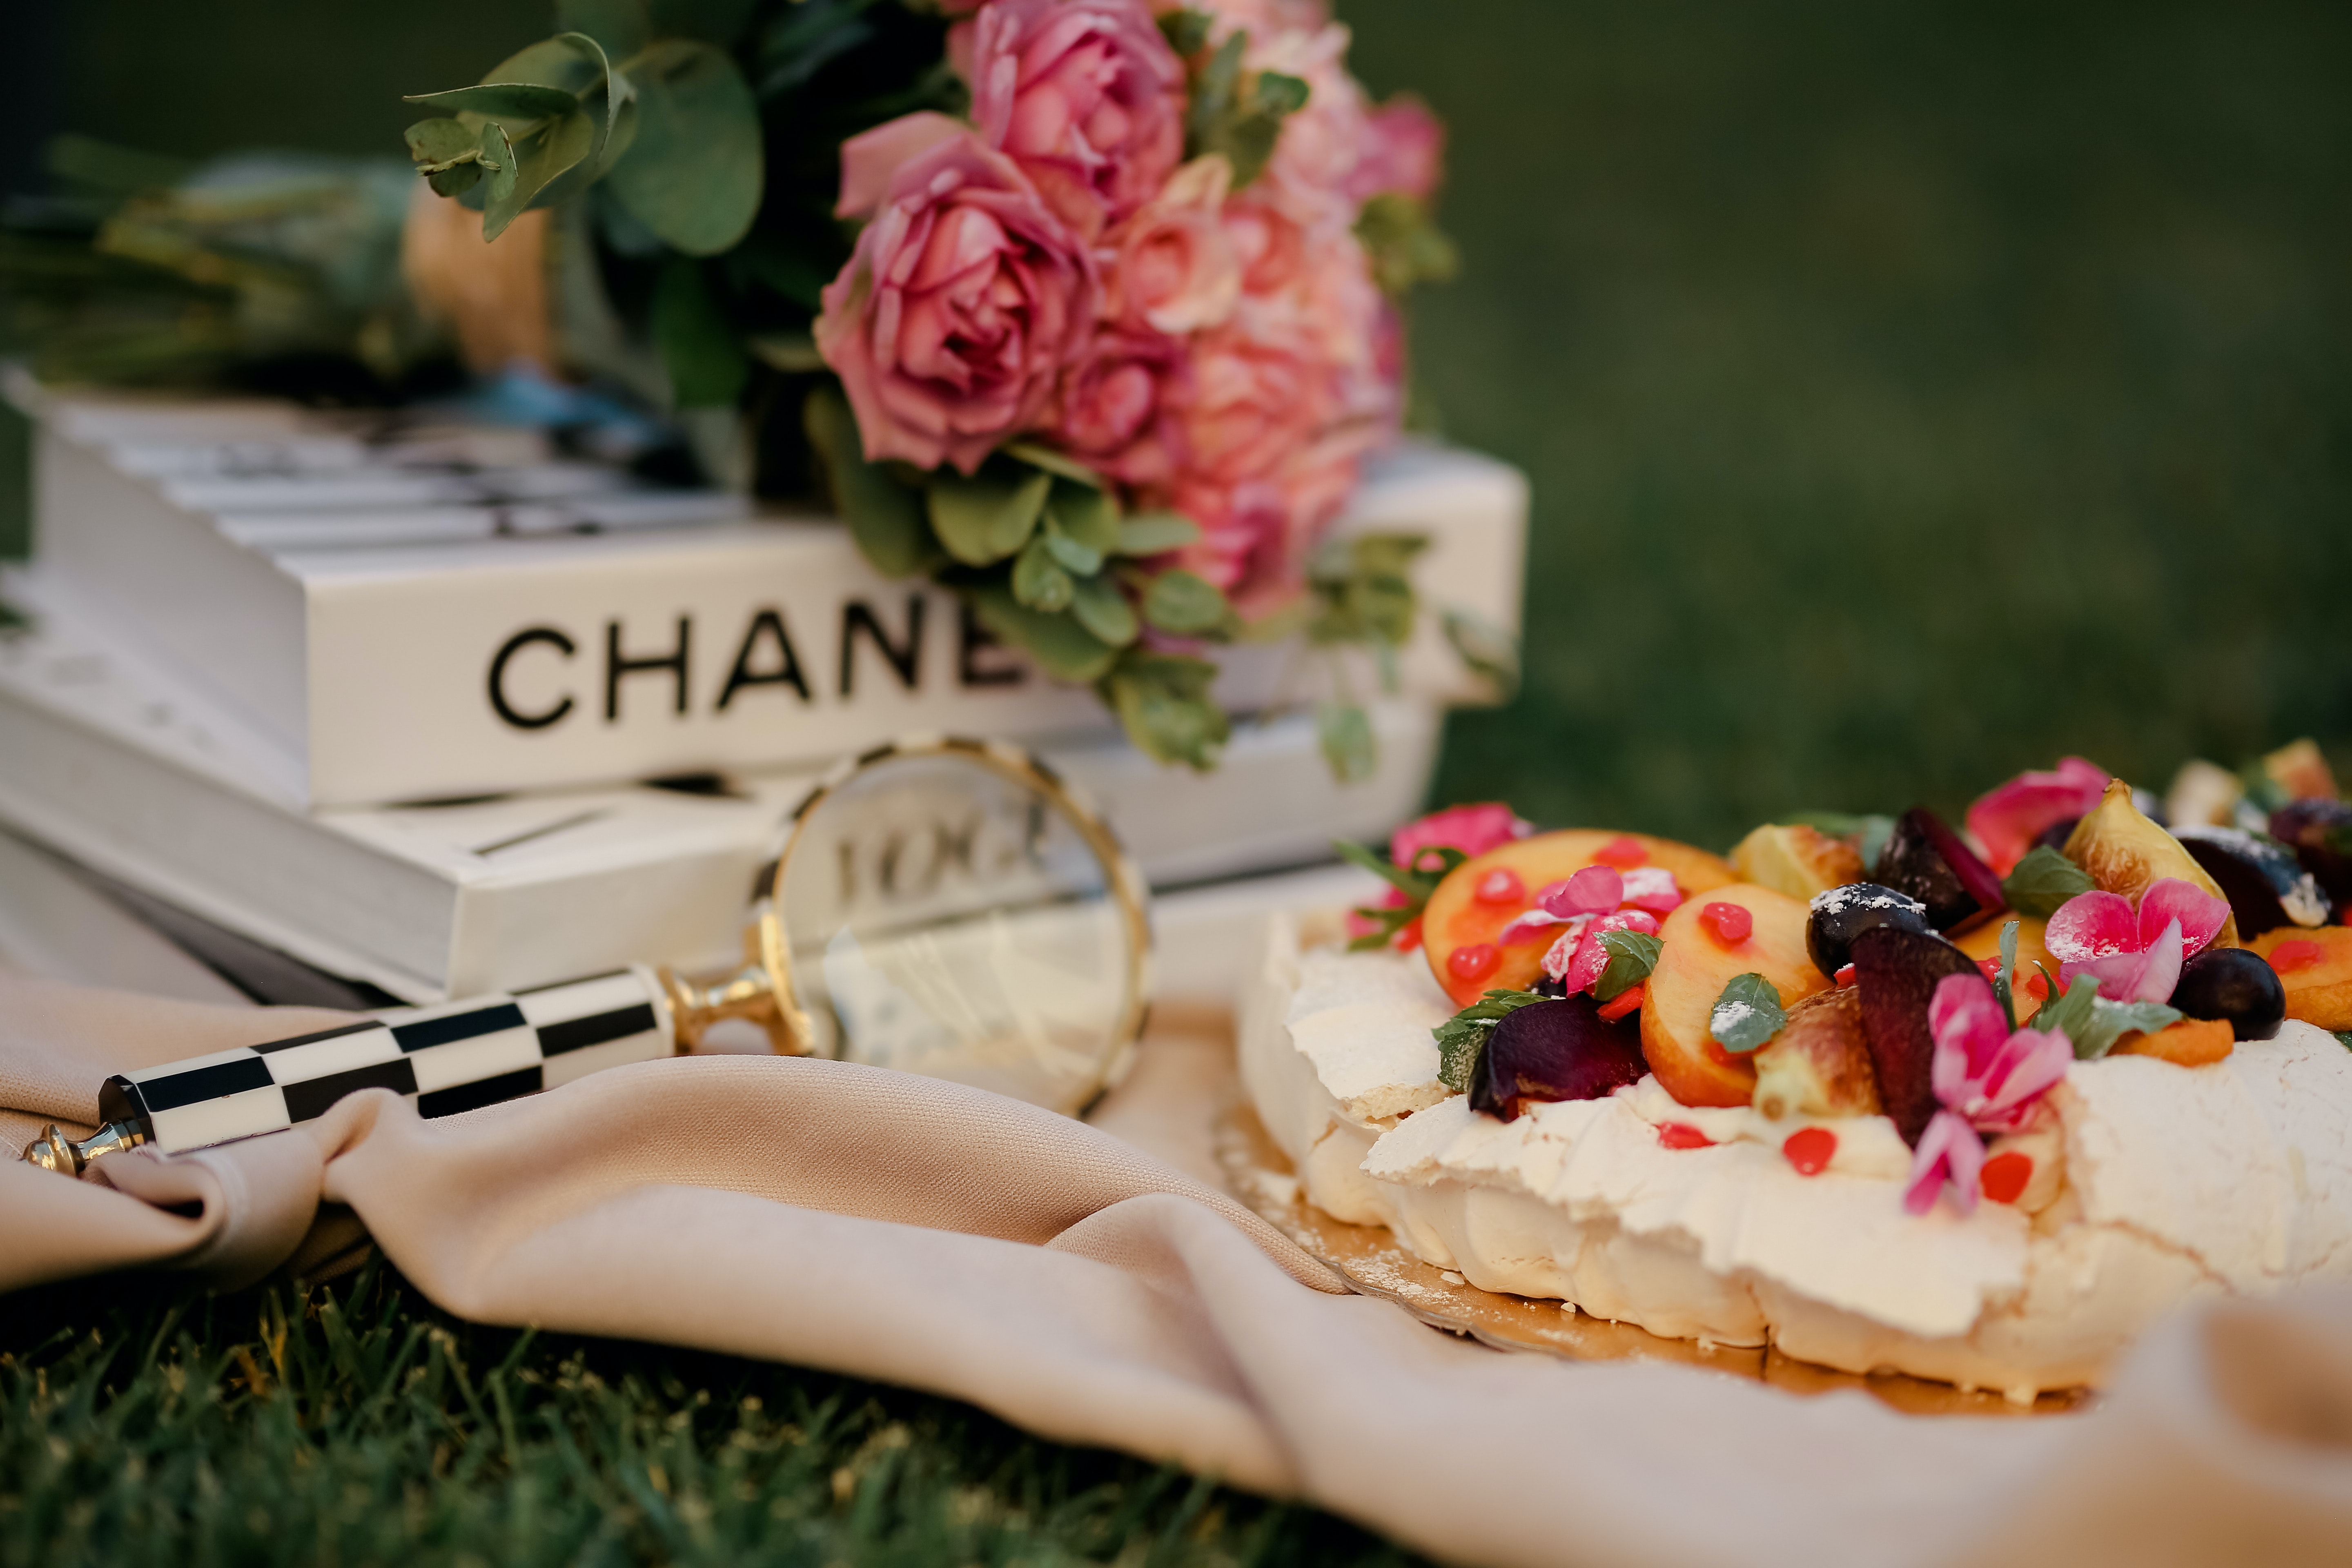 Chanel flowers and cake